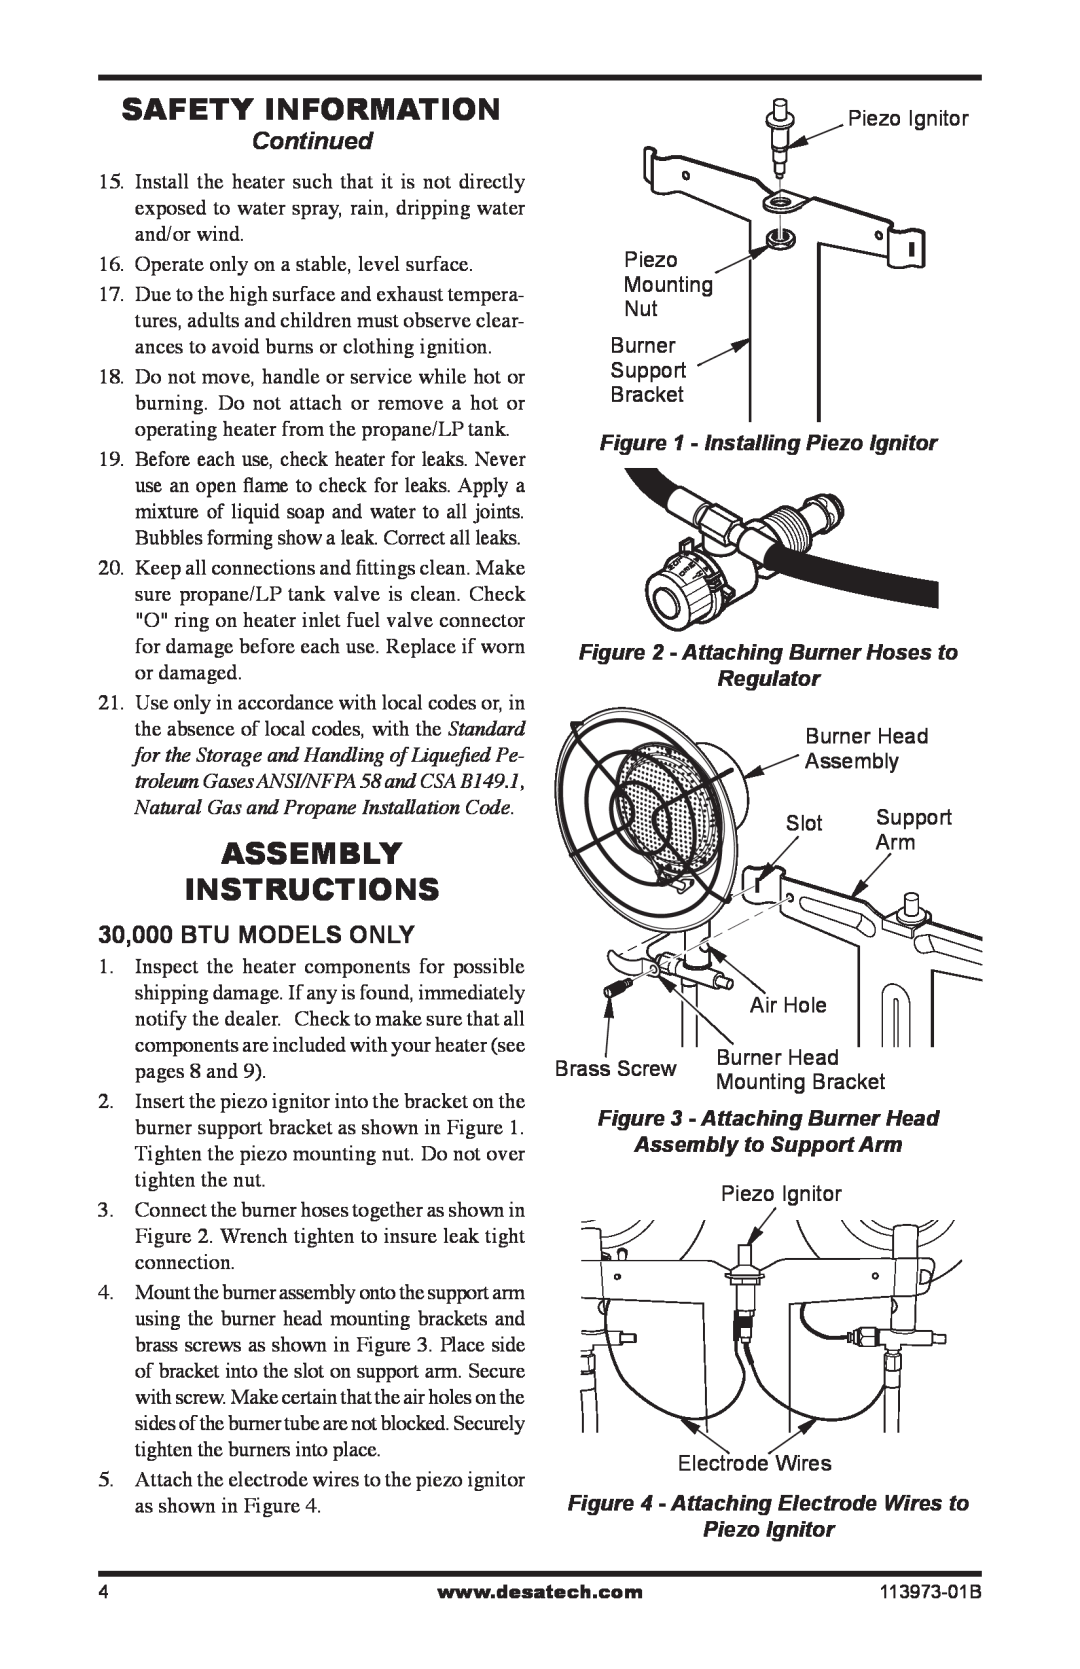 Desa AND TT30 10 Safety Information, Assembly Instructions, Continued, 30,000 BTU MODELS ONLY, Installing Piezo Ignitor 